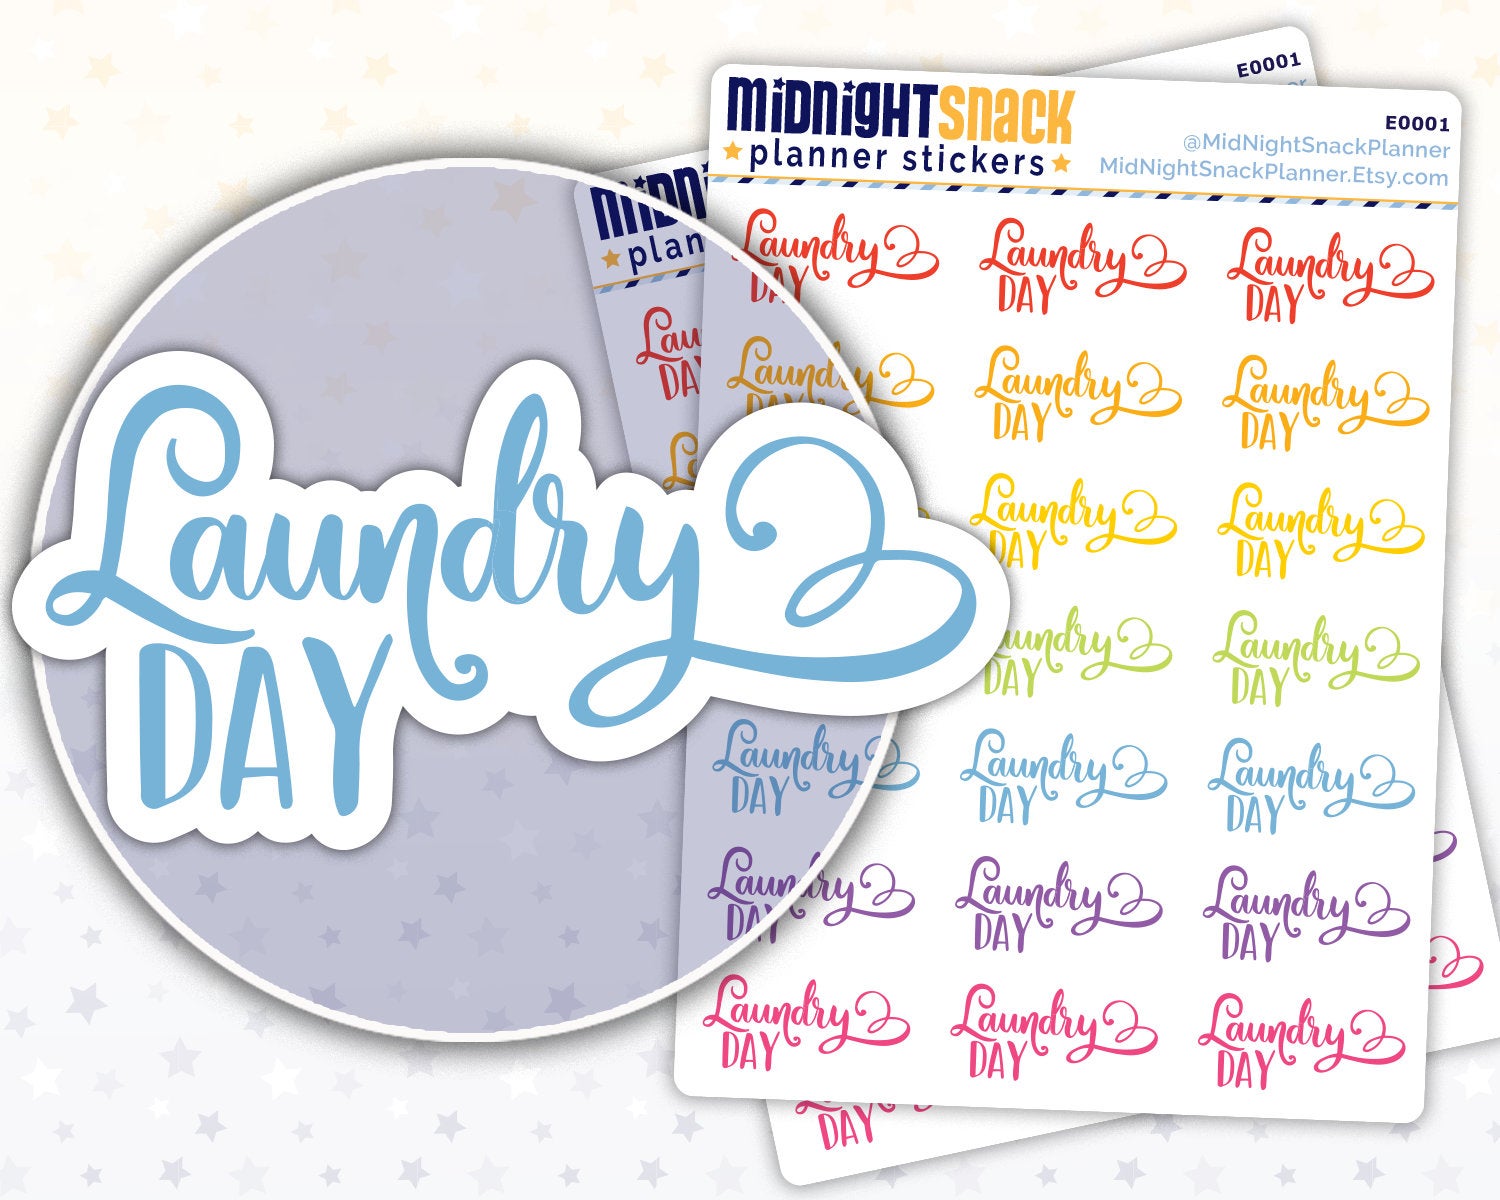 Laundry Day Script Planner Stickers from Midnight Snack Planner